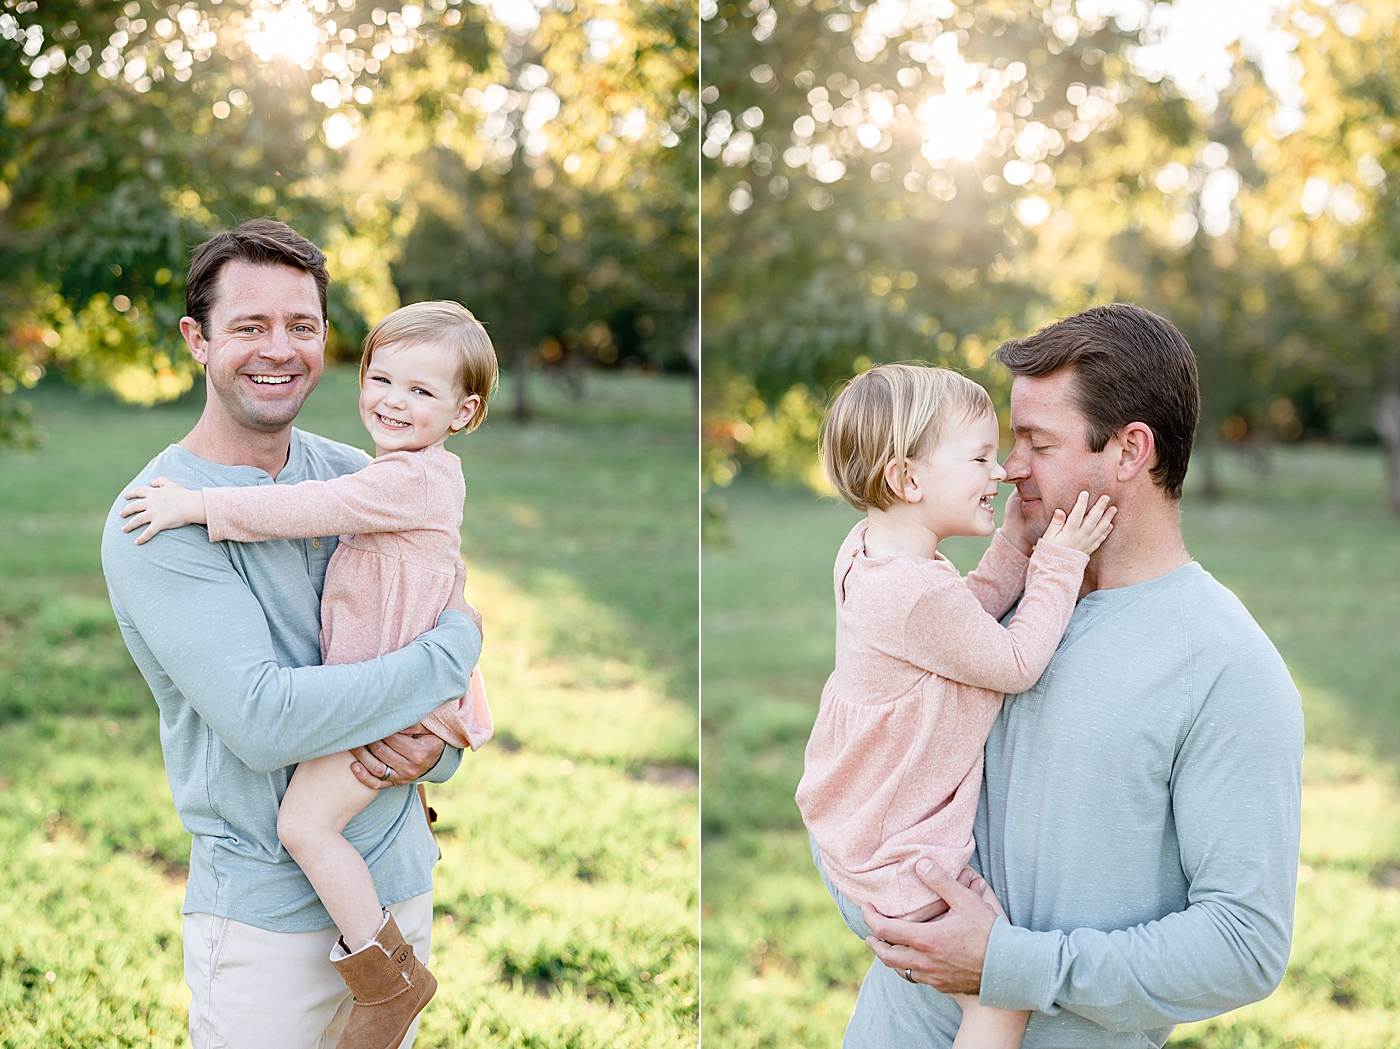 Daddy-daughter photos by Brittany Elise Photography.